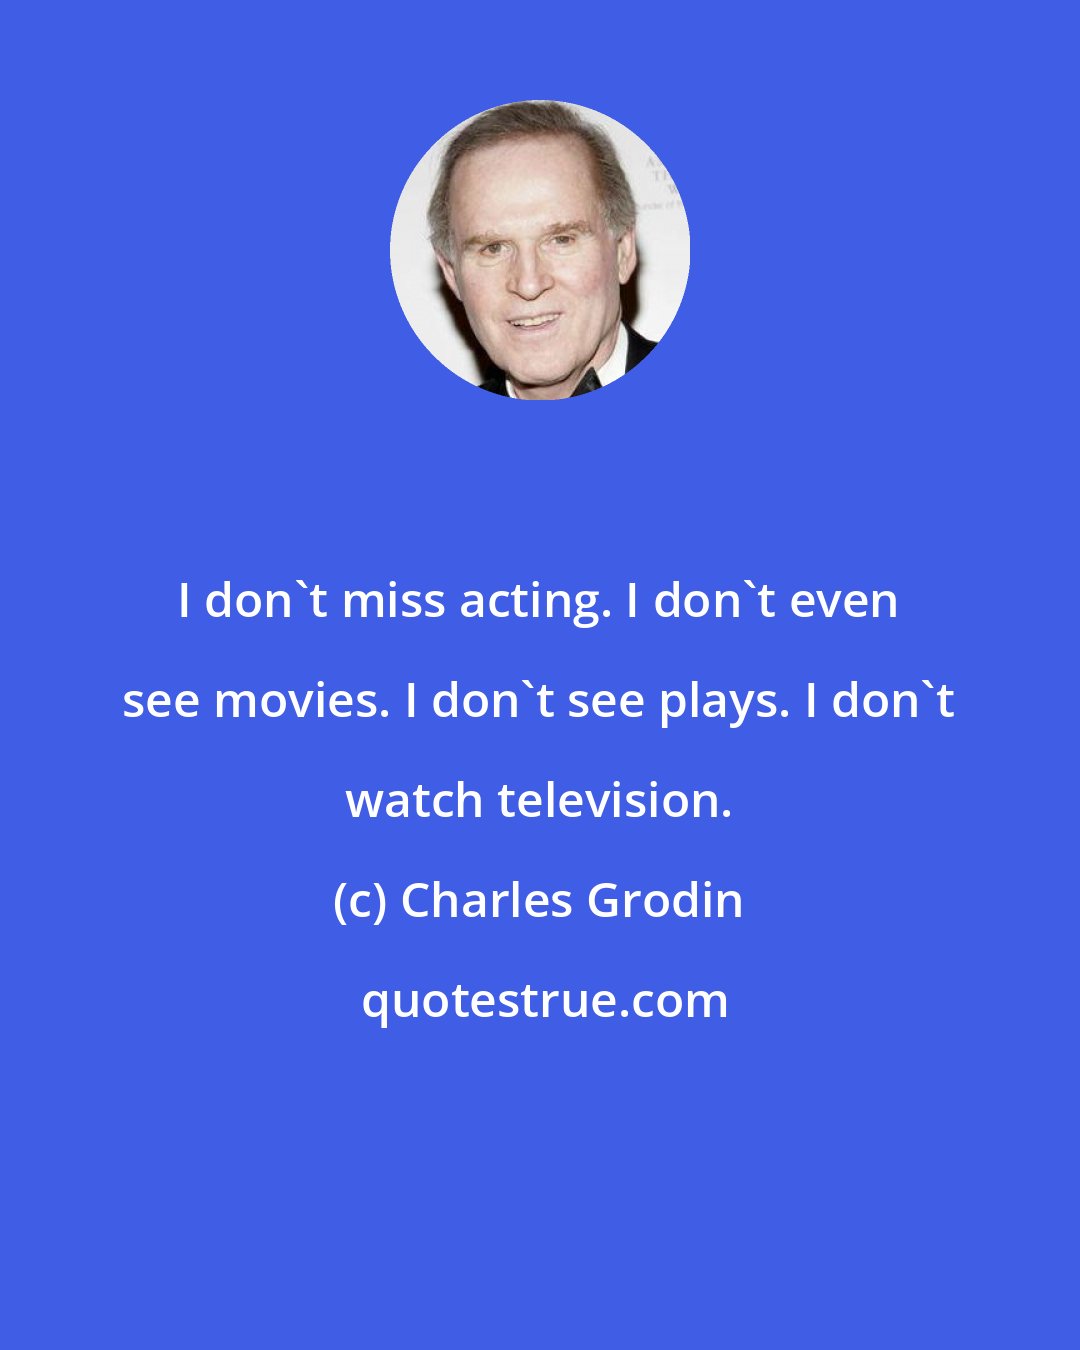 Charles Grodin: I don't miss acting. I don't even see movies. I don't see plays. I don't watch television.